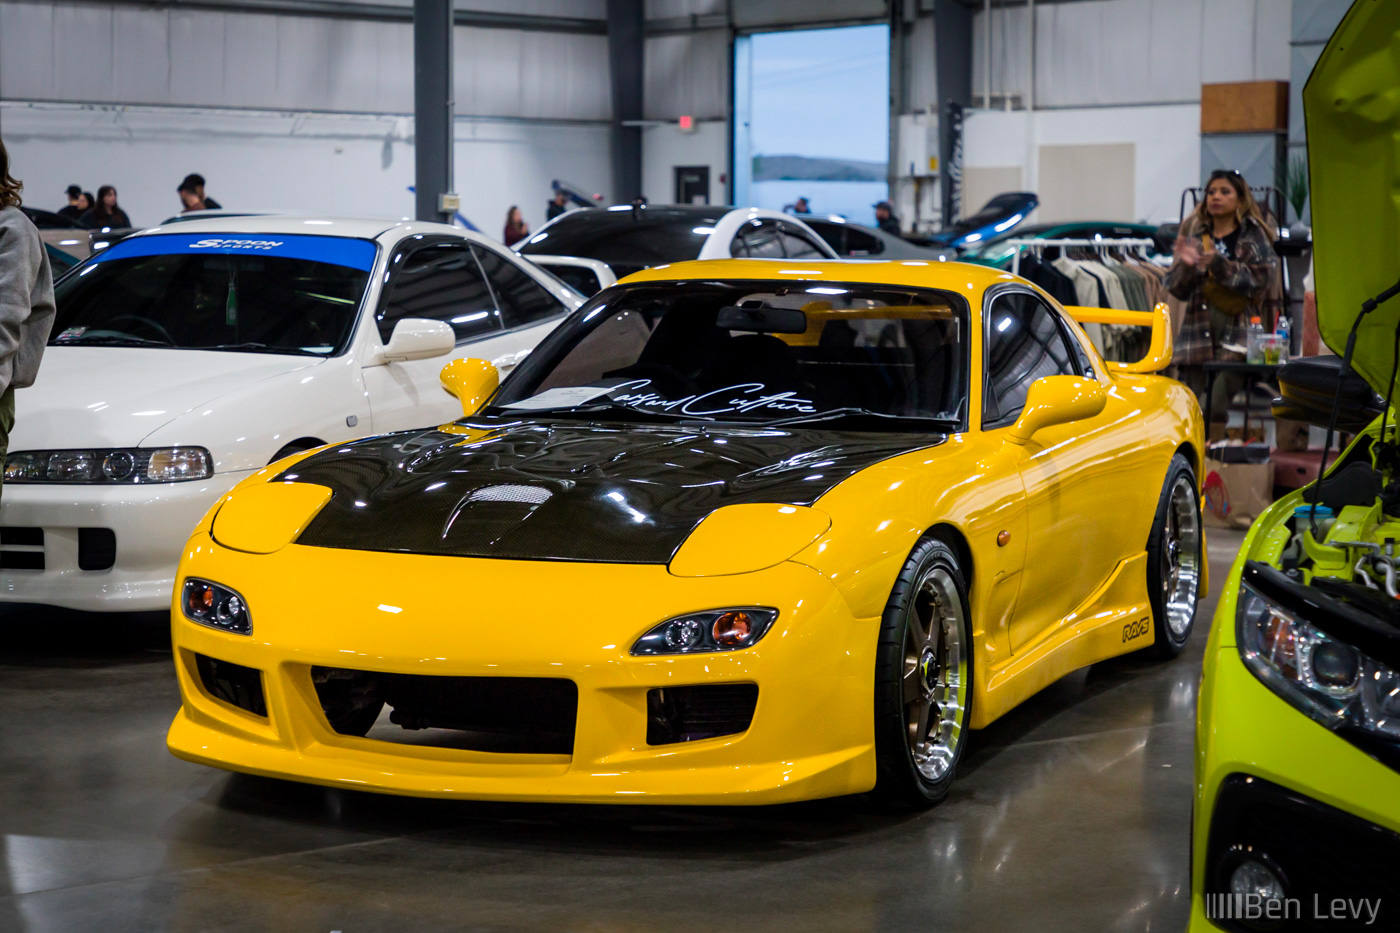 Yellow JDM Mazda RX-7 at Cars and Culture Show